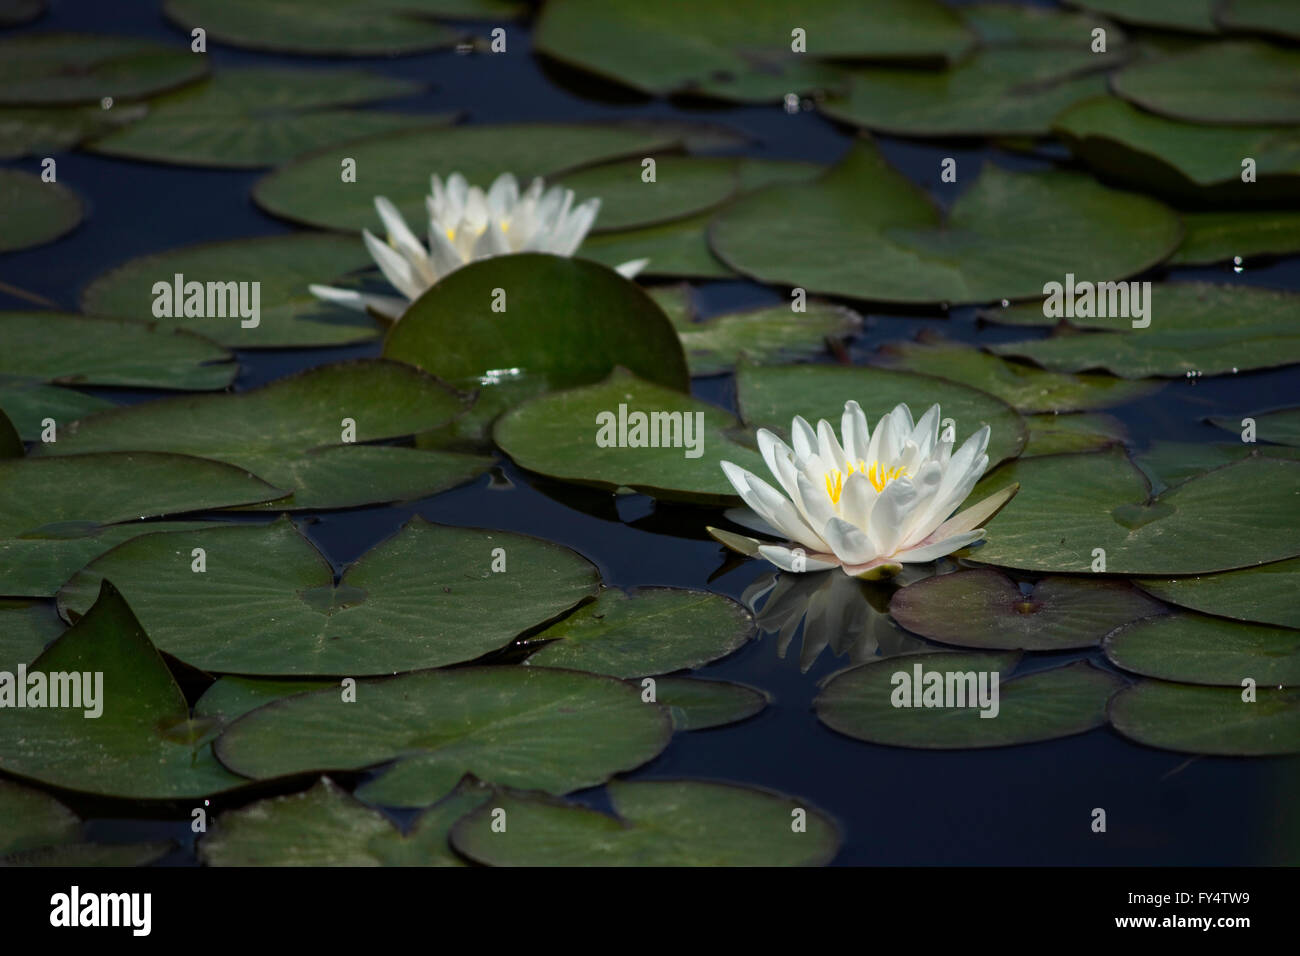 Water lily (waterlily), a rhizomatous aquatic herb and floating beautiful green lily pads (leaves). Stock Photo